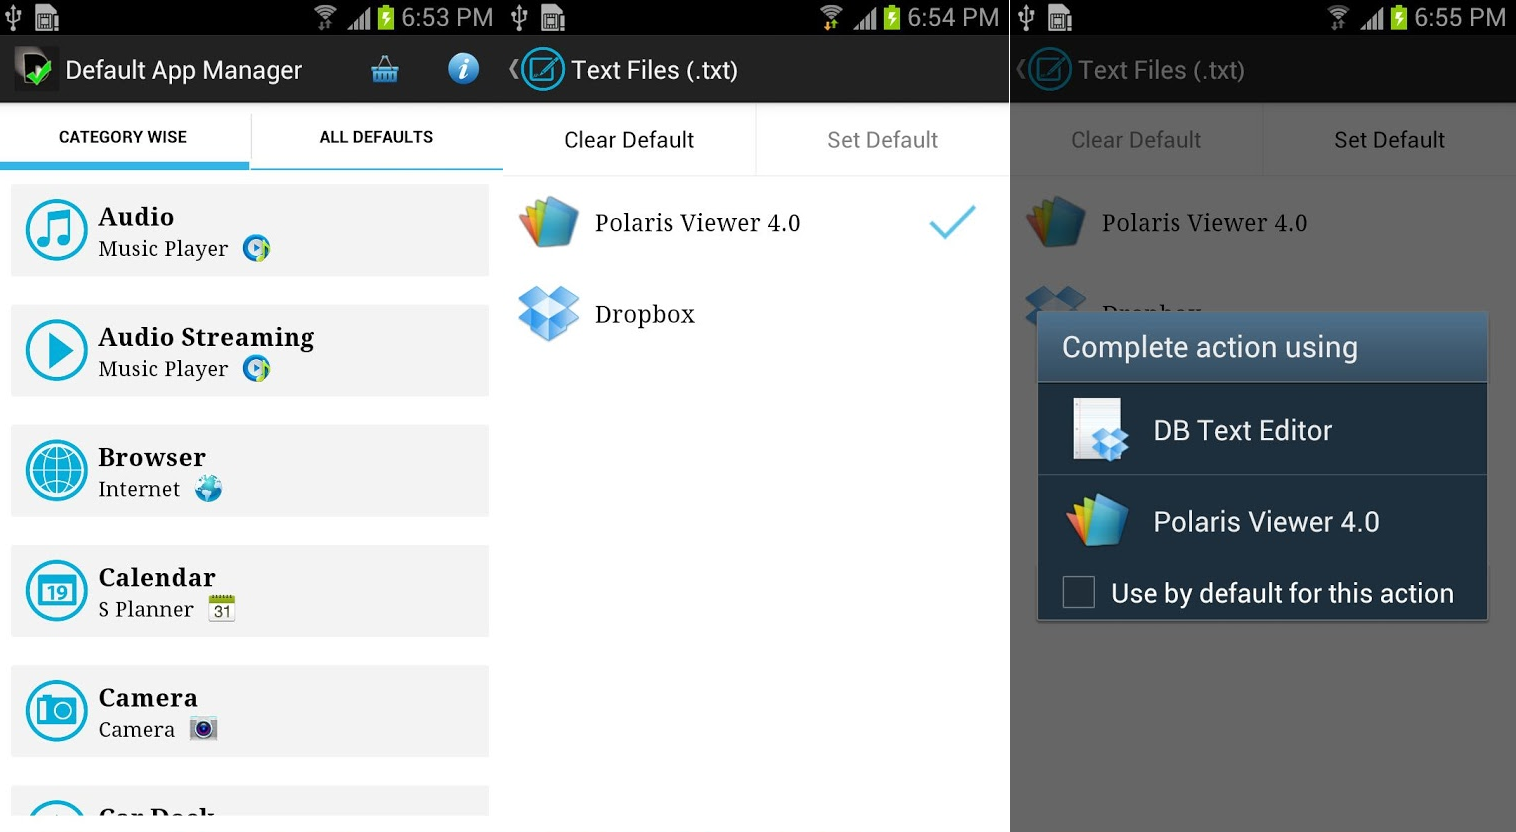 Default App Manager Lite provides an easy way of managing default apps on Android devices - How to manage the default apps on Android devices the easy way